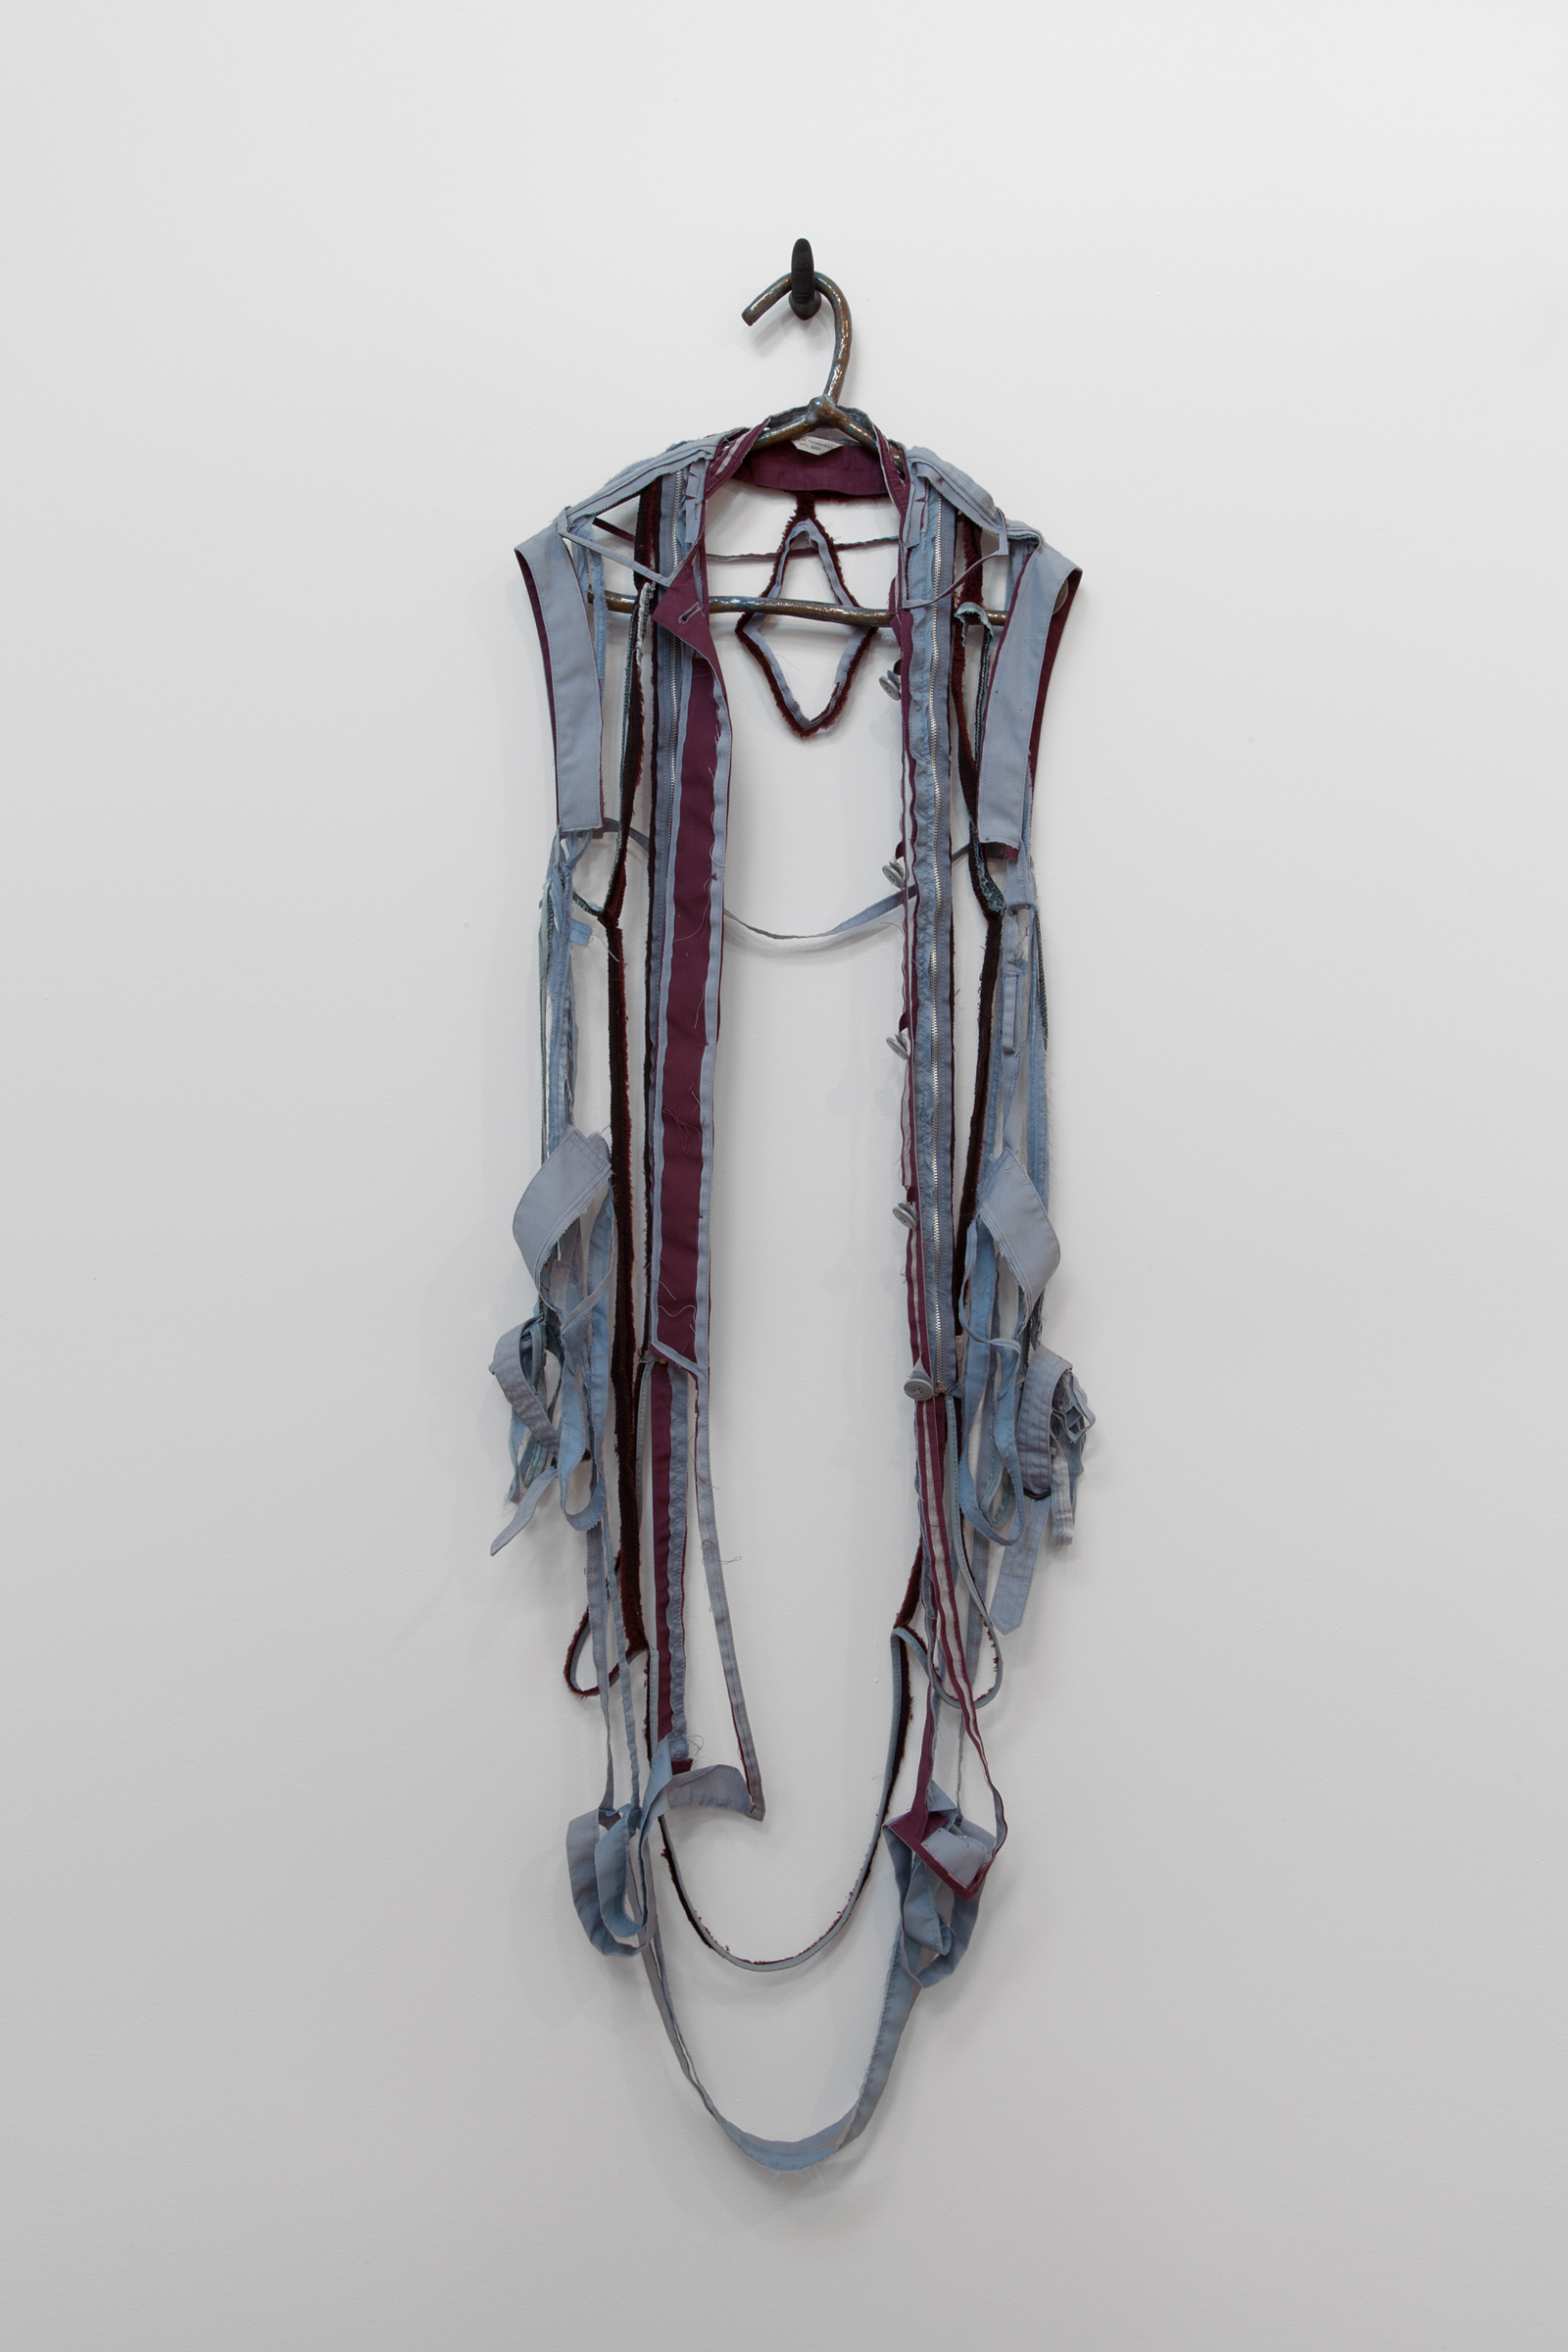   ANNA SEW HOY   maroon/bleu lavande , fired stoneware, trench coat and resin finger hook, 58" x 18" x 4.5", 2012 